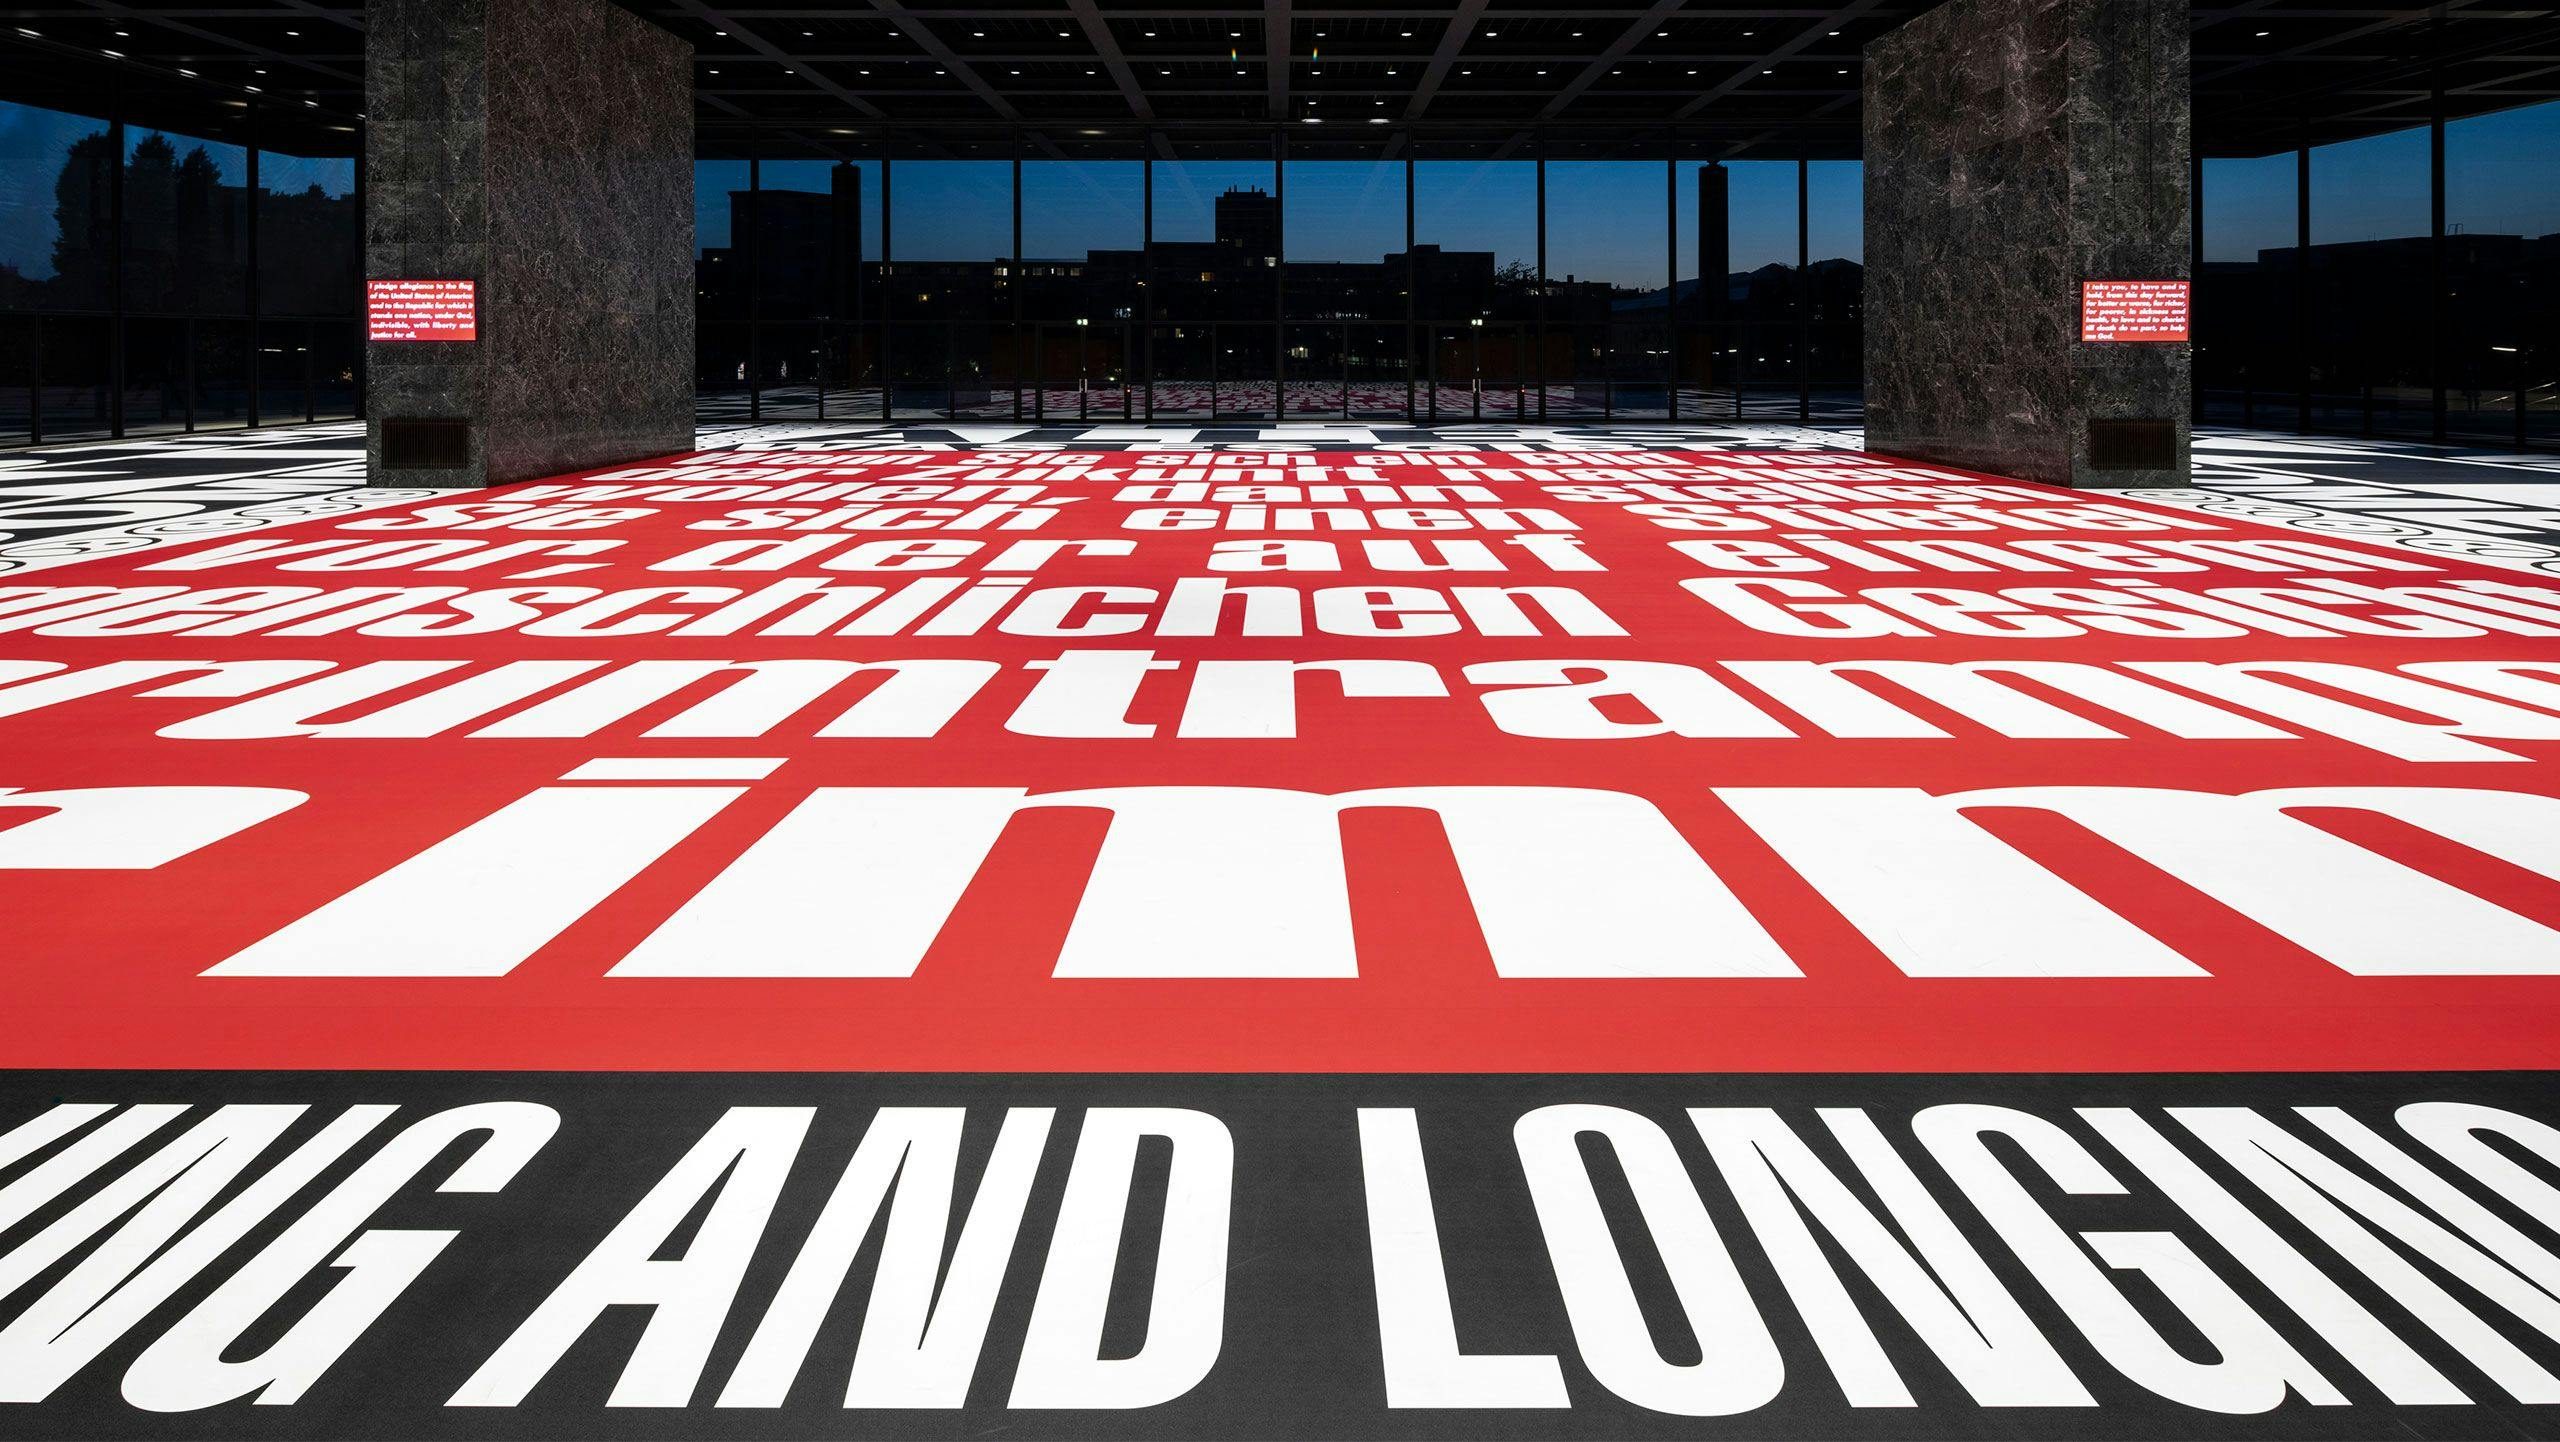 Installation view of the exhibition, Barbara Kruger: Bitte lachen / Please cry, at Neue Nationalgalerie in Berlin, dated 2022.